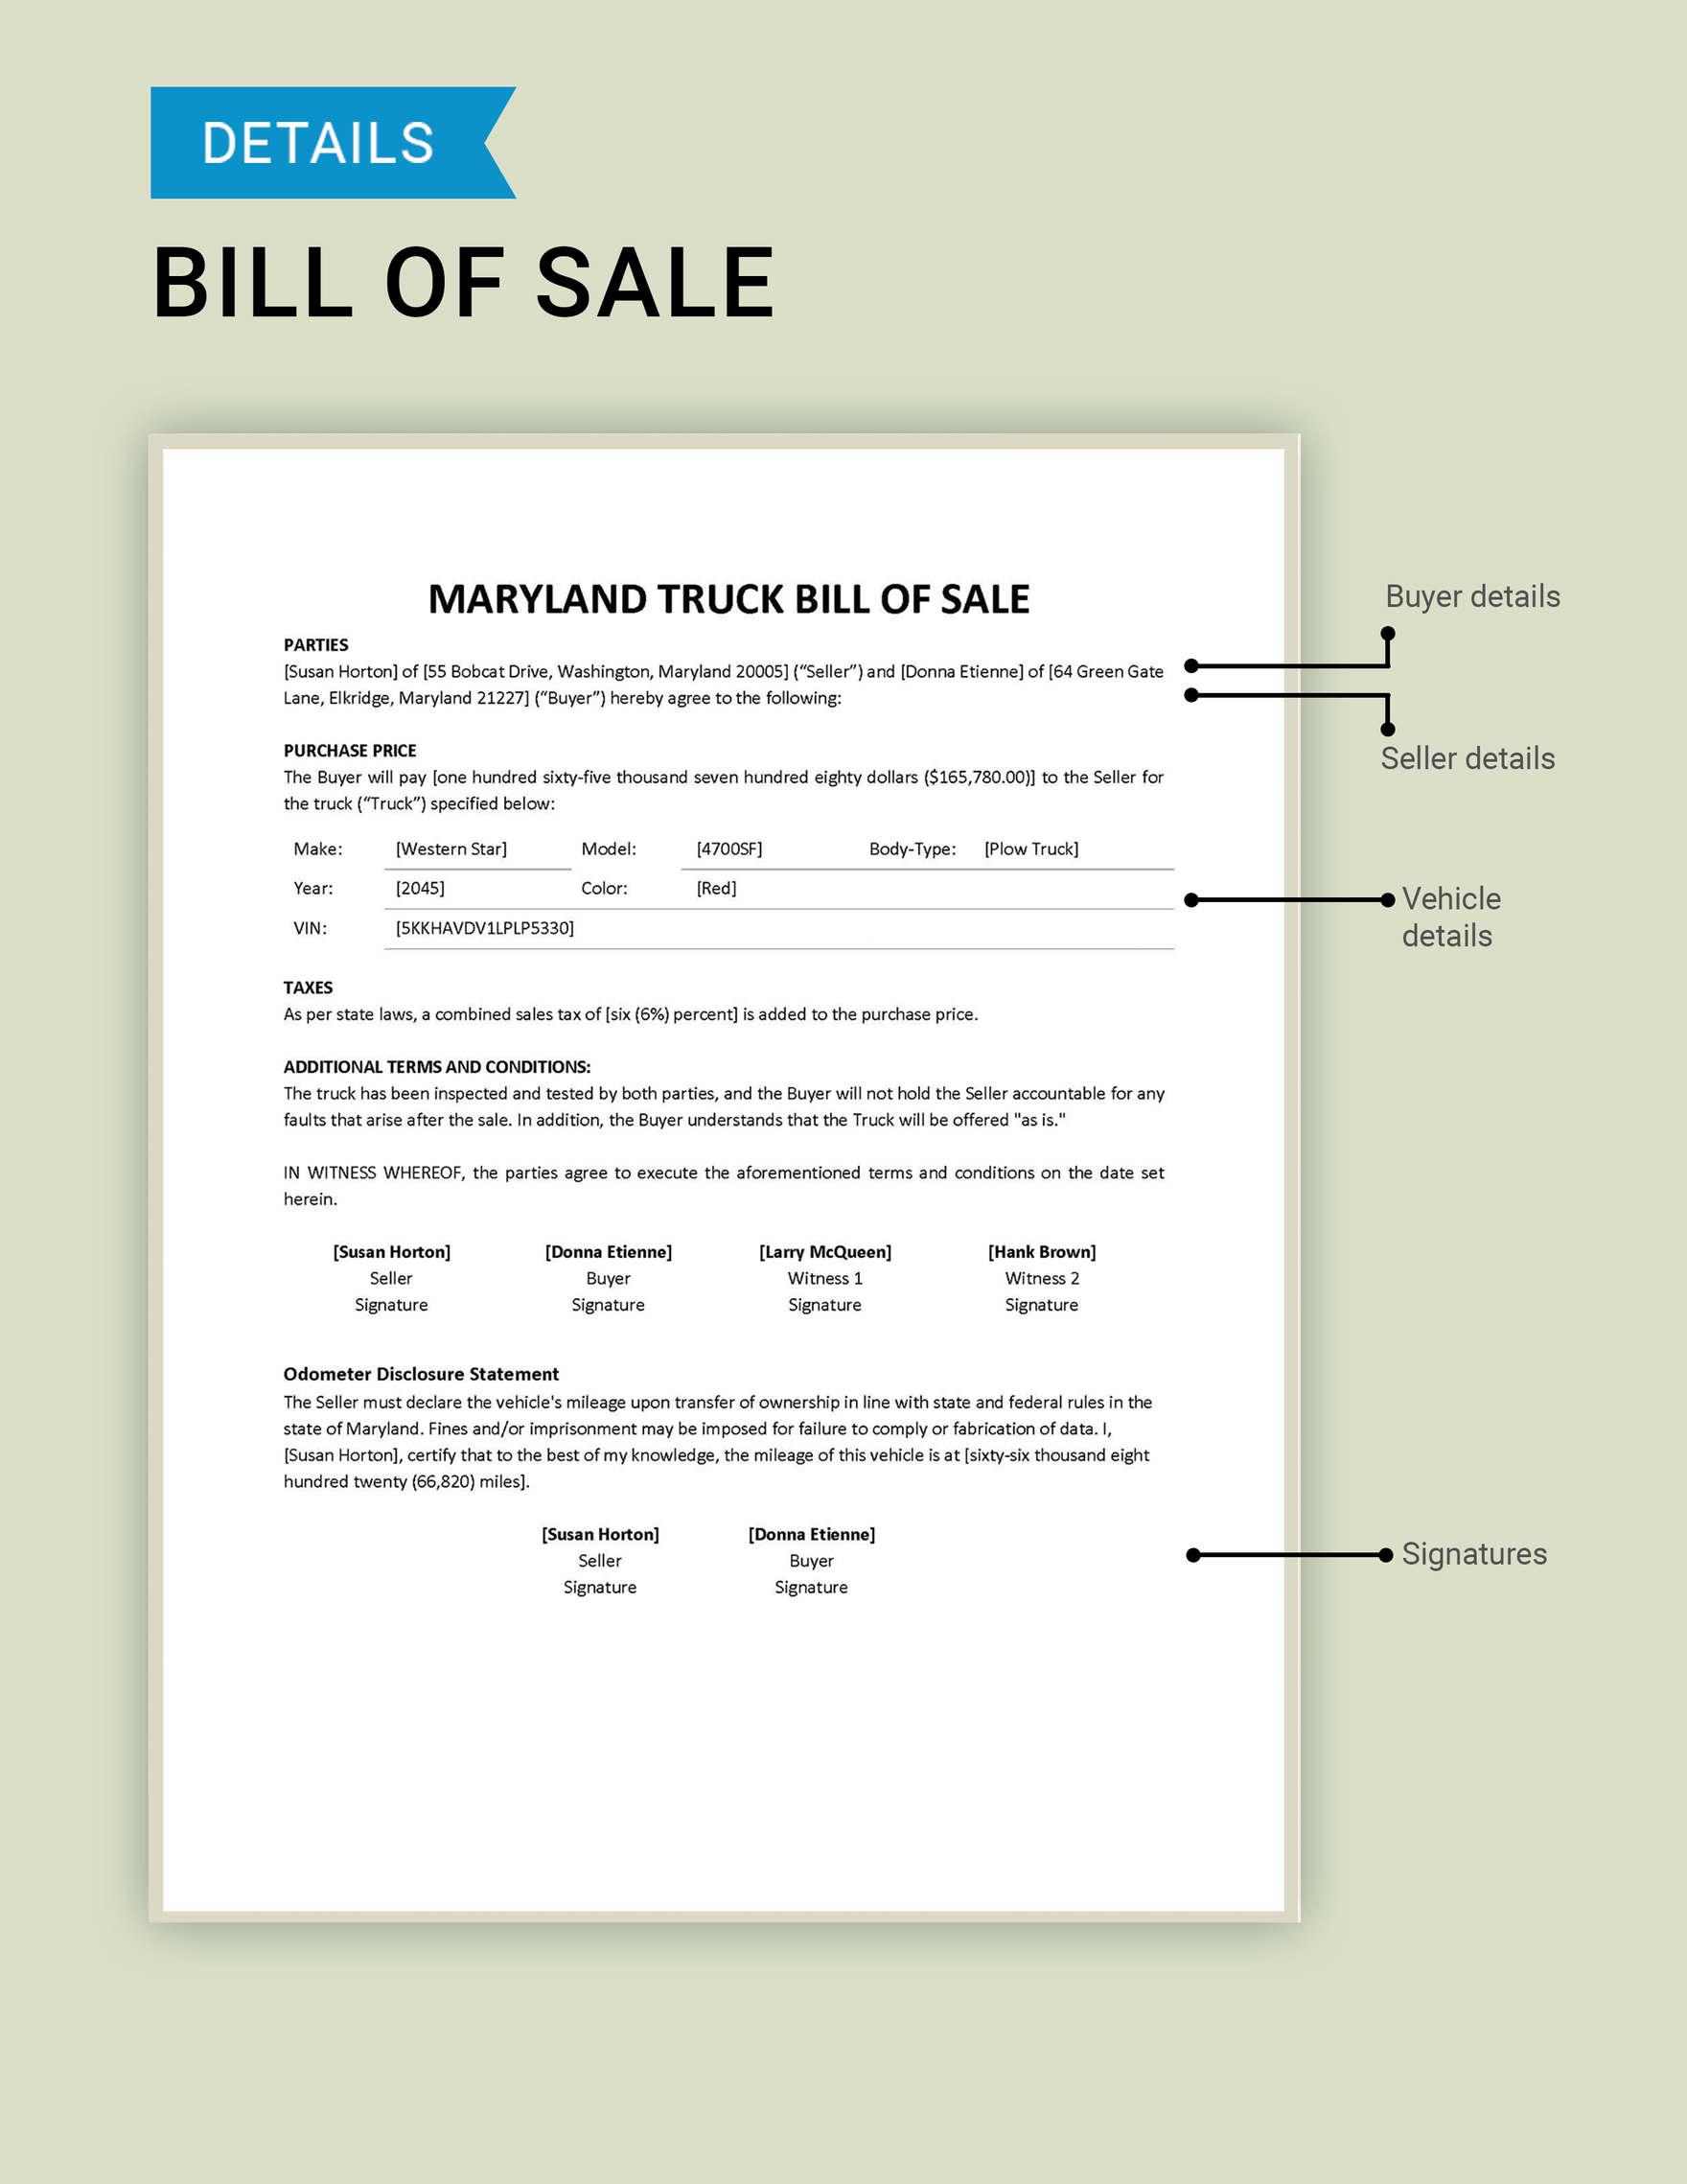 Maryland Truck Bill of Sale Template